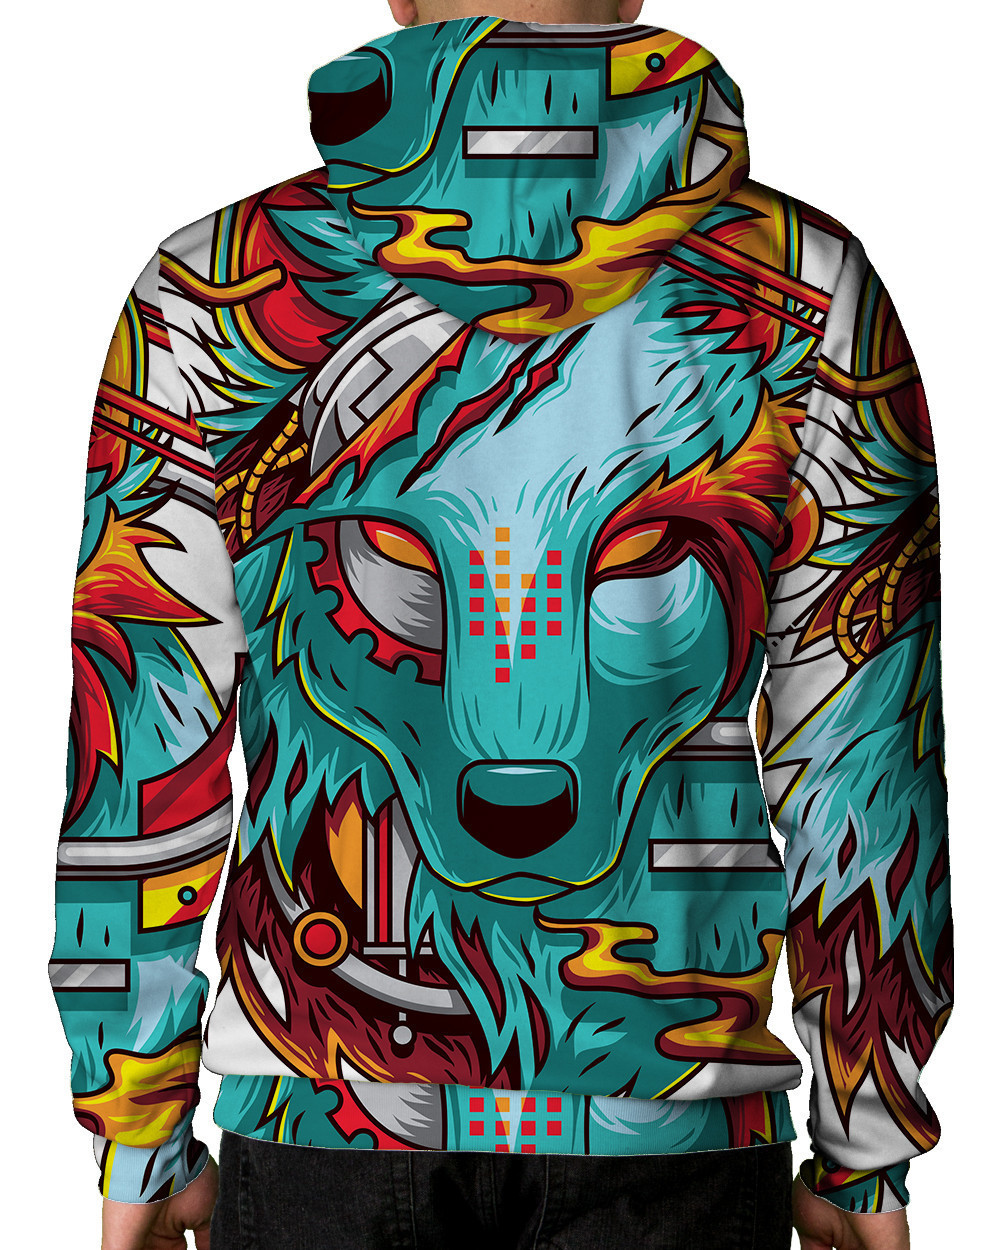 Sick digital wolf design from iHeartRaves